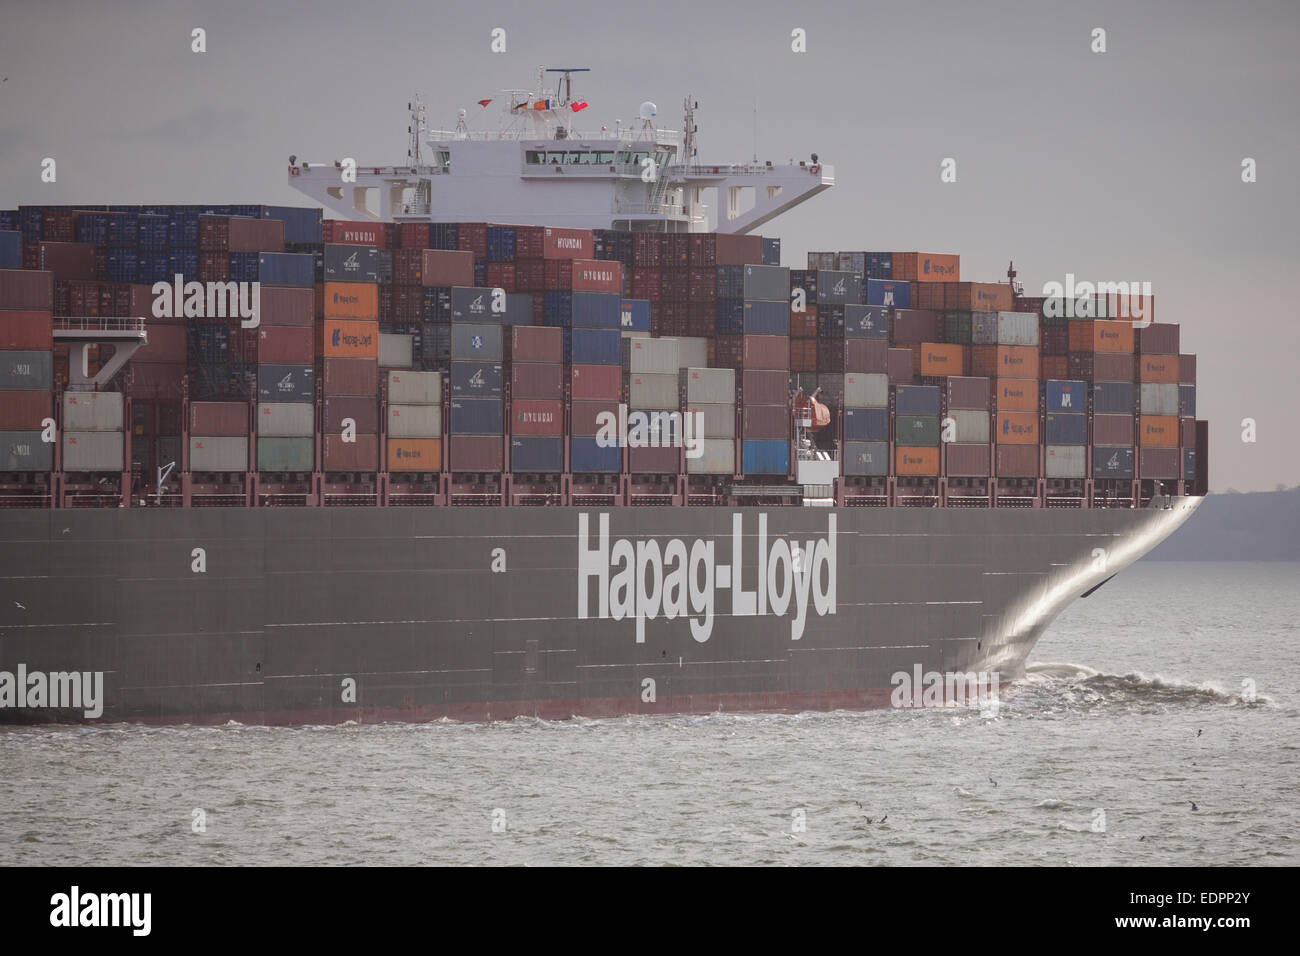 Il Hapag-Lloyds nave cargo, Essen Express in partenza Southampton. Foto Stock